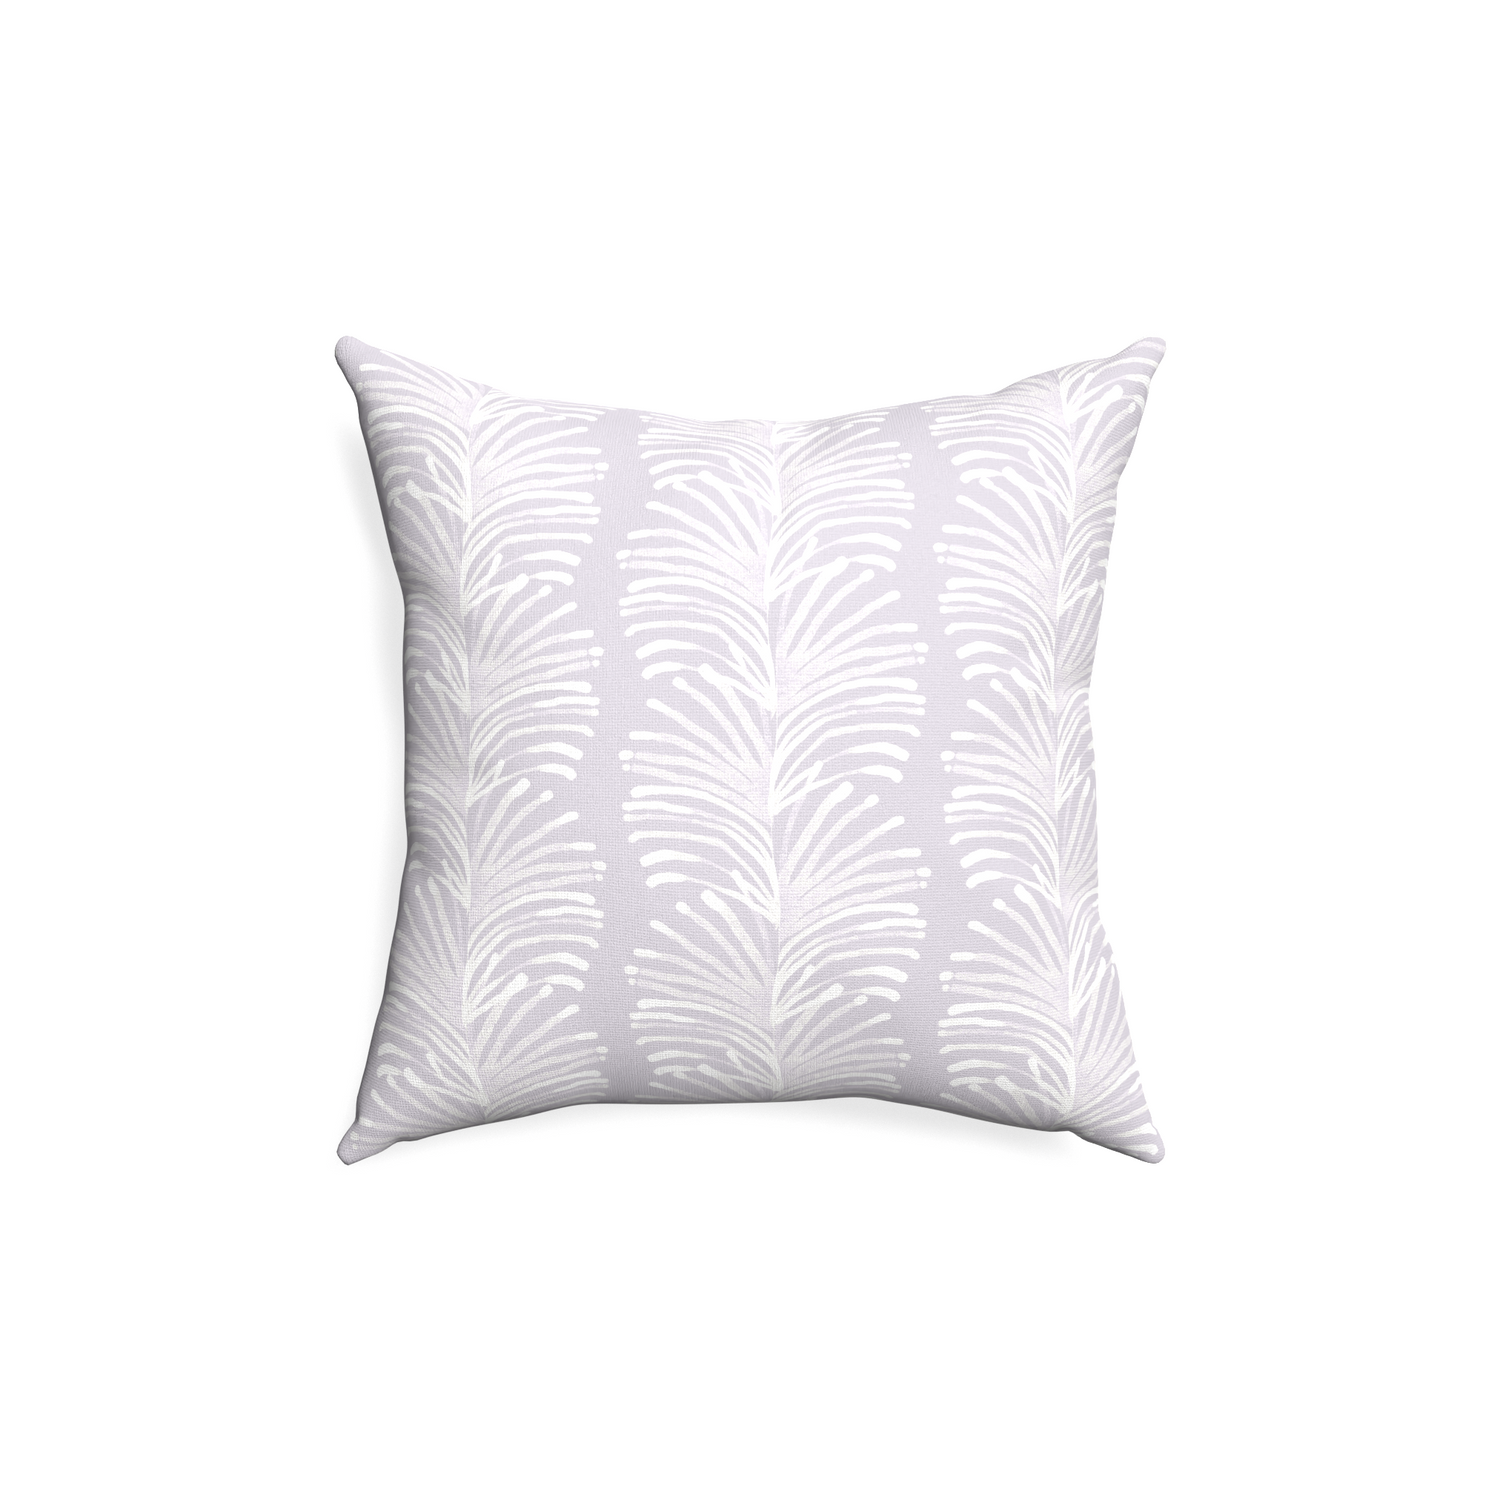 18-square emma lavender custom pillow with none on white background